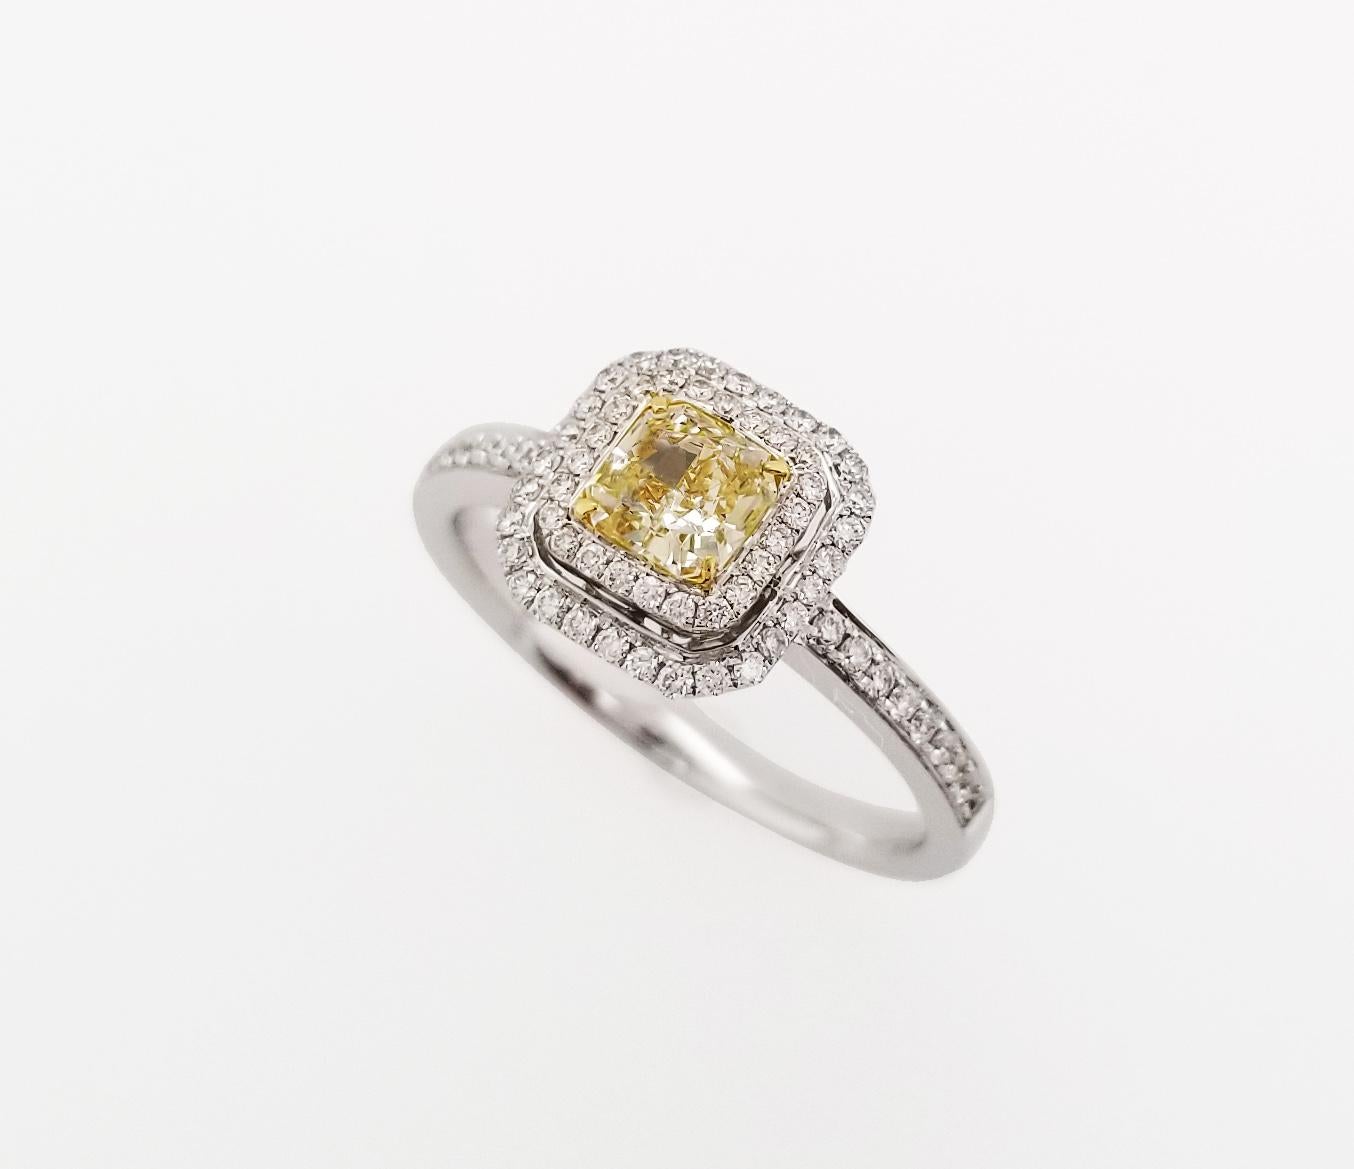 Mother's Day Gift Guide!

A natural 0.52 carat cushion-cut Fancy Light Yellow Diamond Halo on an 18k White Gold band, featuring two rows of round-brilliant white diamonds. All diamonds are GIA-Certified and the total carat weight of the white